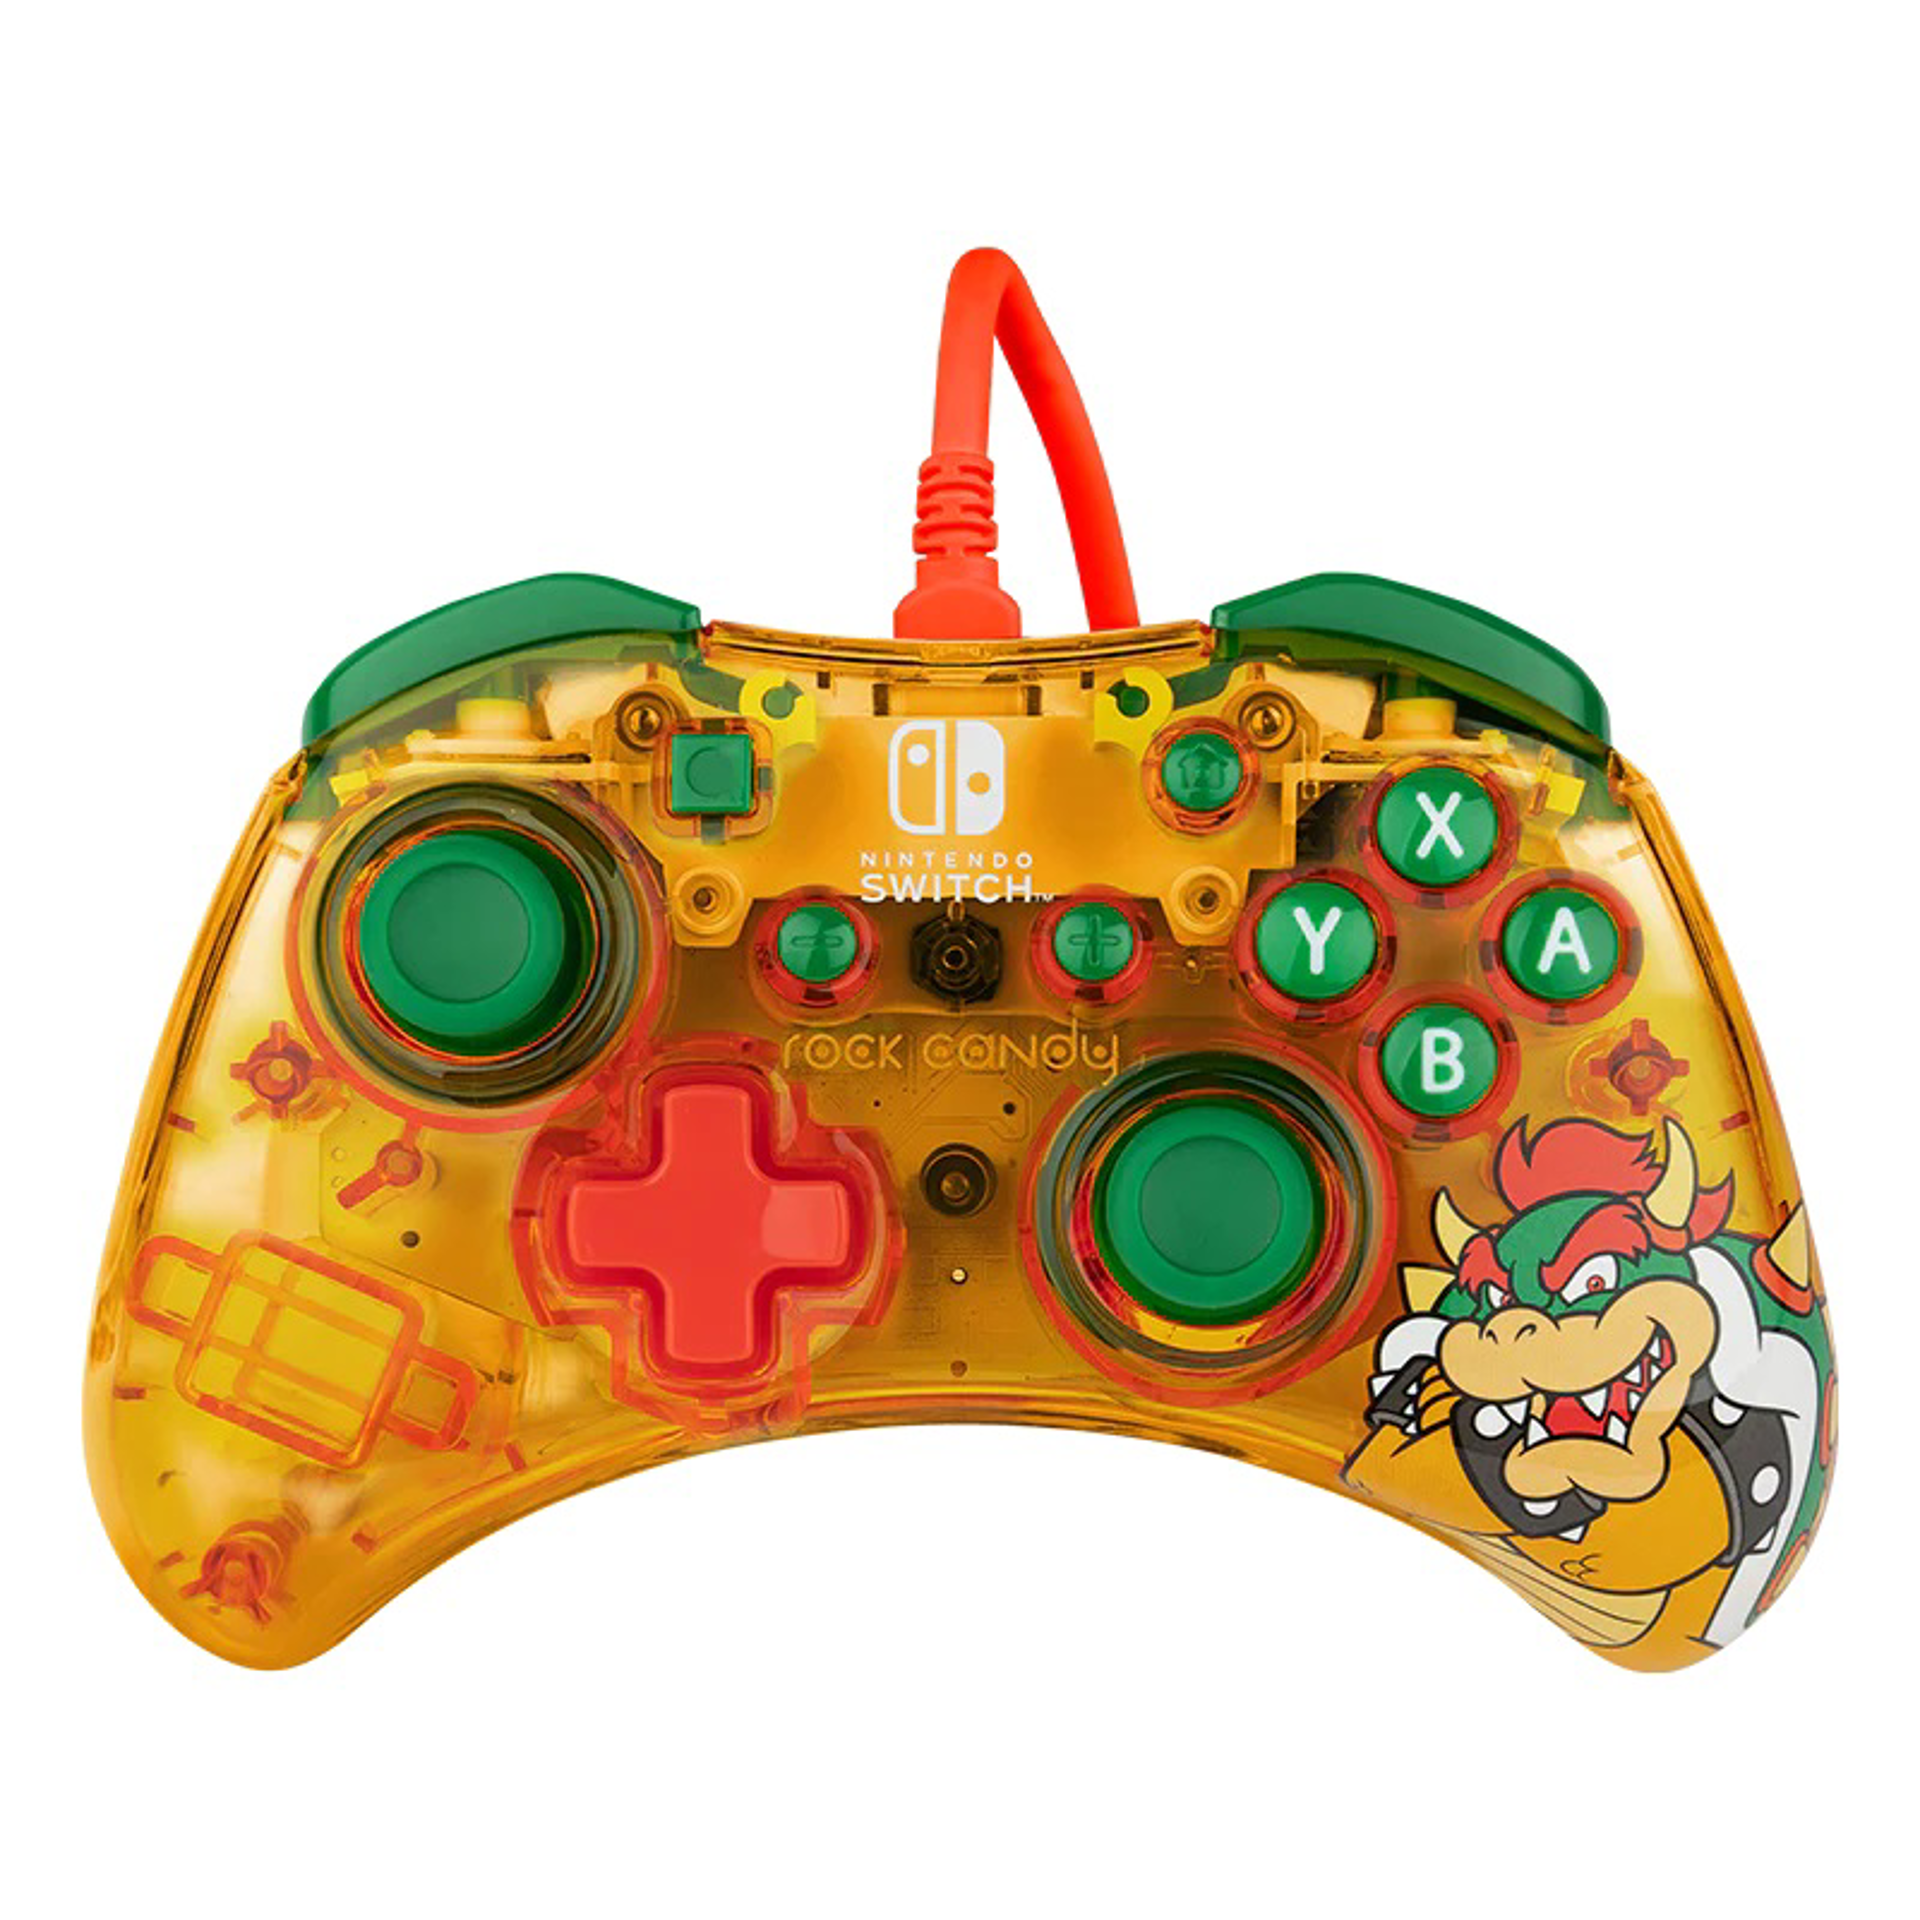 PDP - Manette filaire Rock Candy Bowser pour Nintendo Switch et Switch OLED